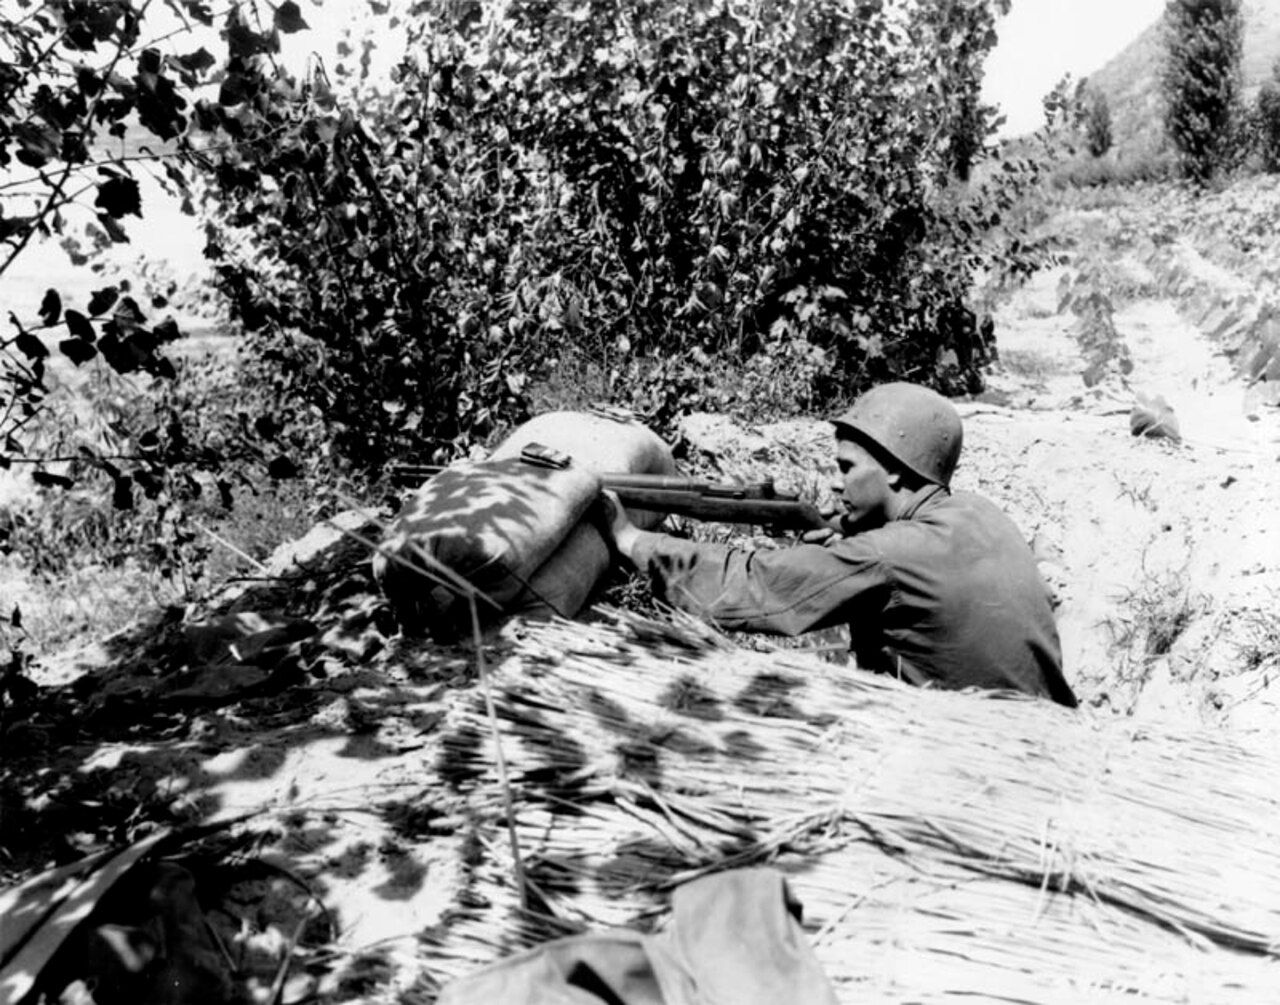 A soldier props a rifle on a sandbag near a hill and trees.